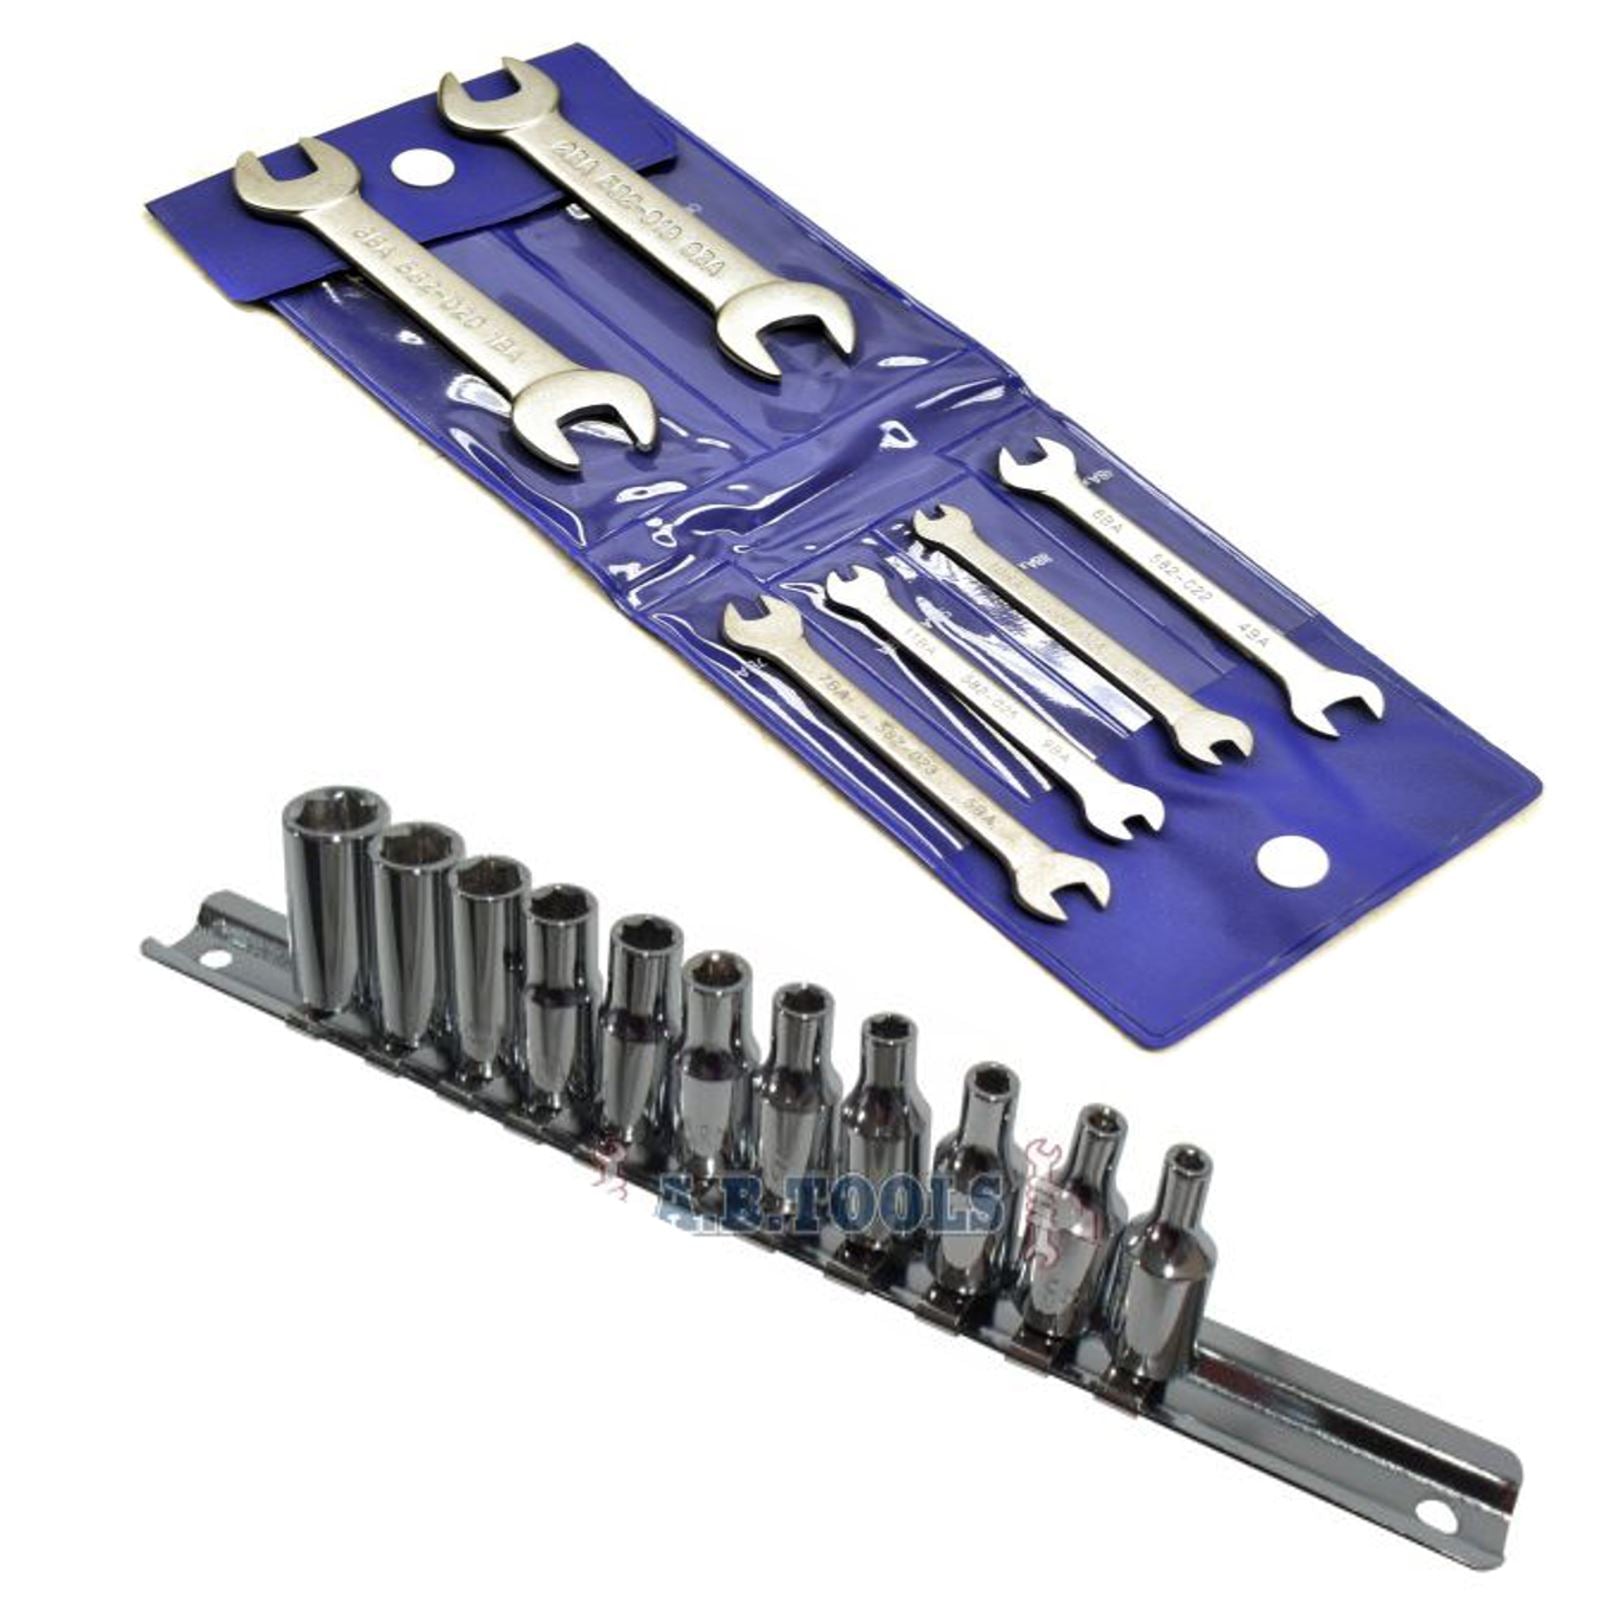 1/4" Drive 11pc BA Sockets & 6pc BA Spanner Precision Open Ended Wrench